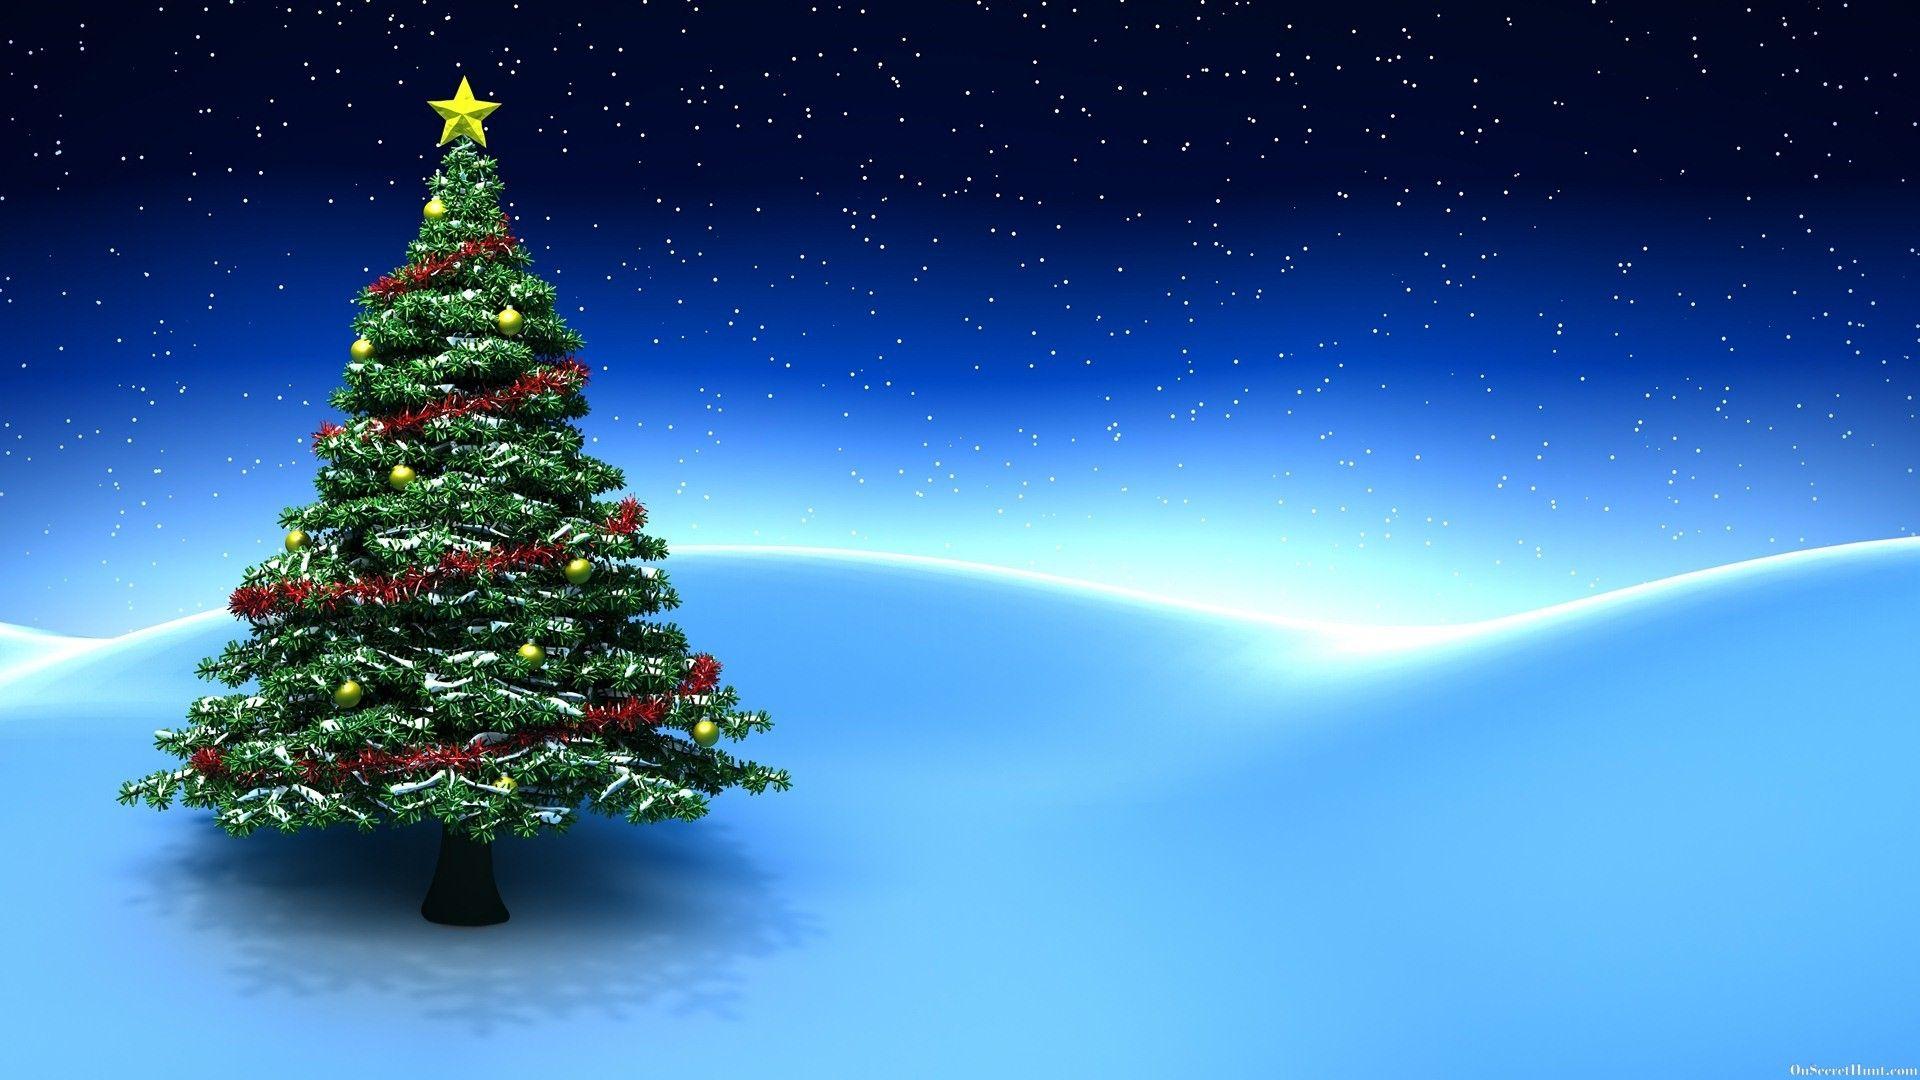 White Christmas 3D Live Wallpaper and Screensaver - YouTube